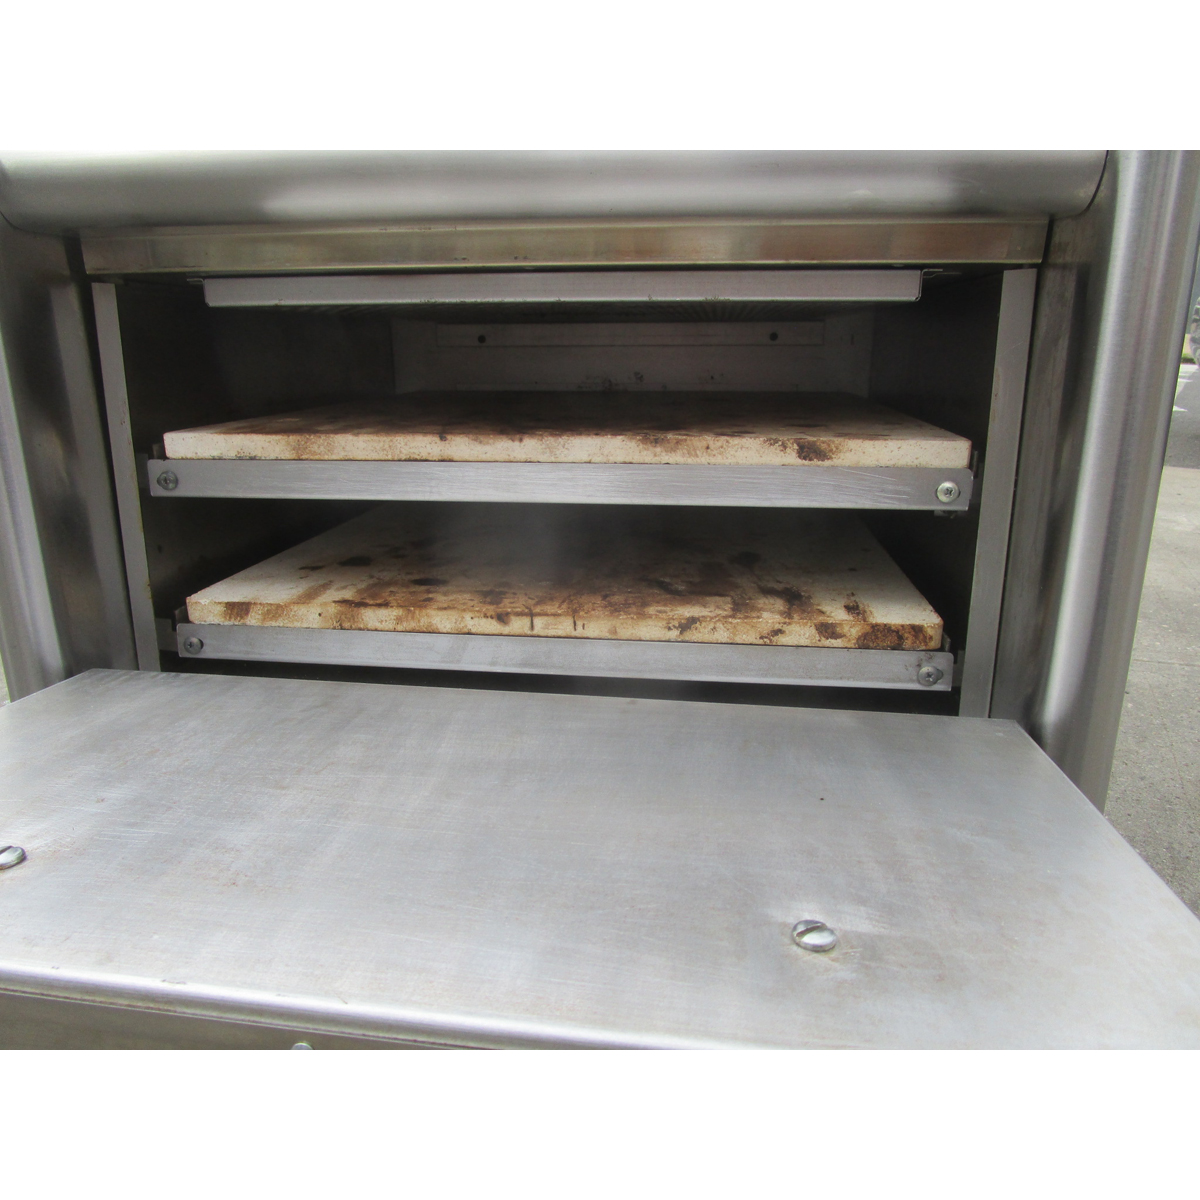 Grindmaster-Cecilware PO18 Table Top Pizza Oven, Used Excellent Condition image 3